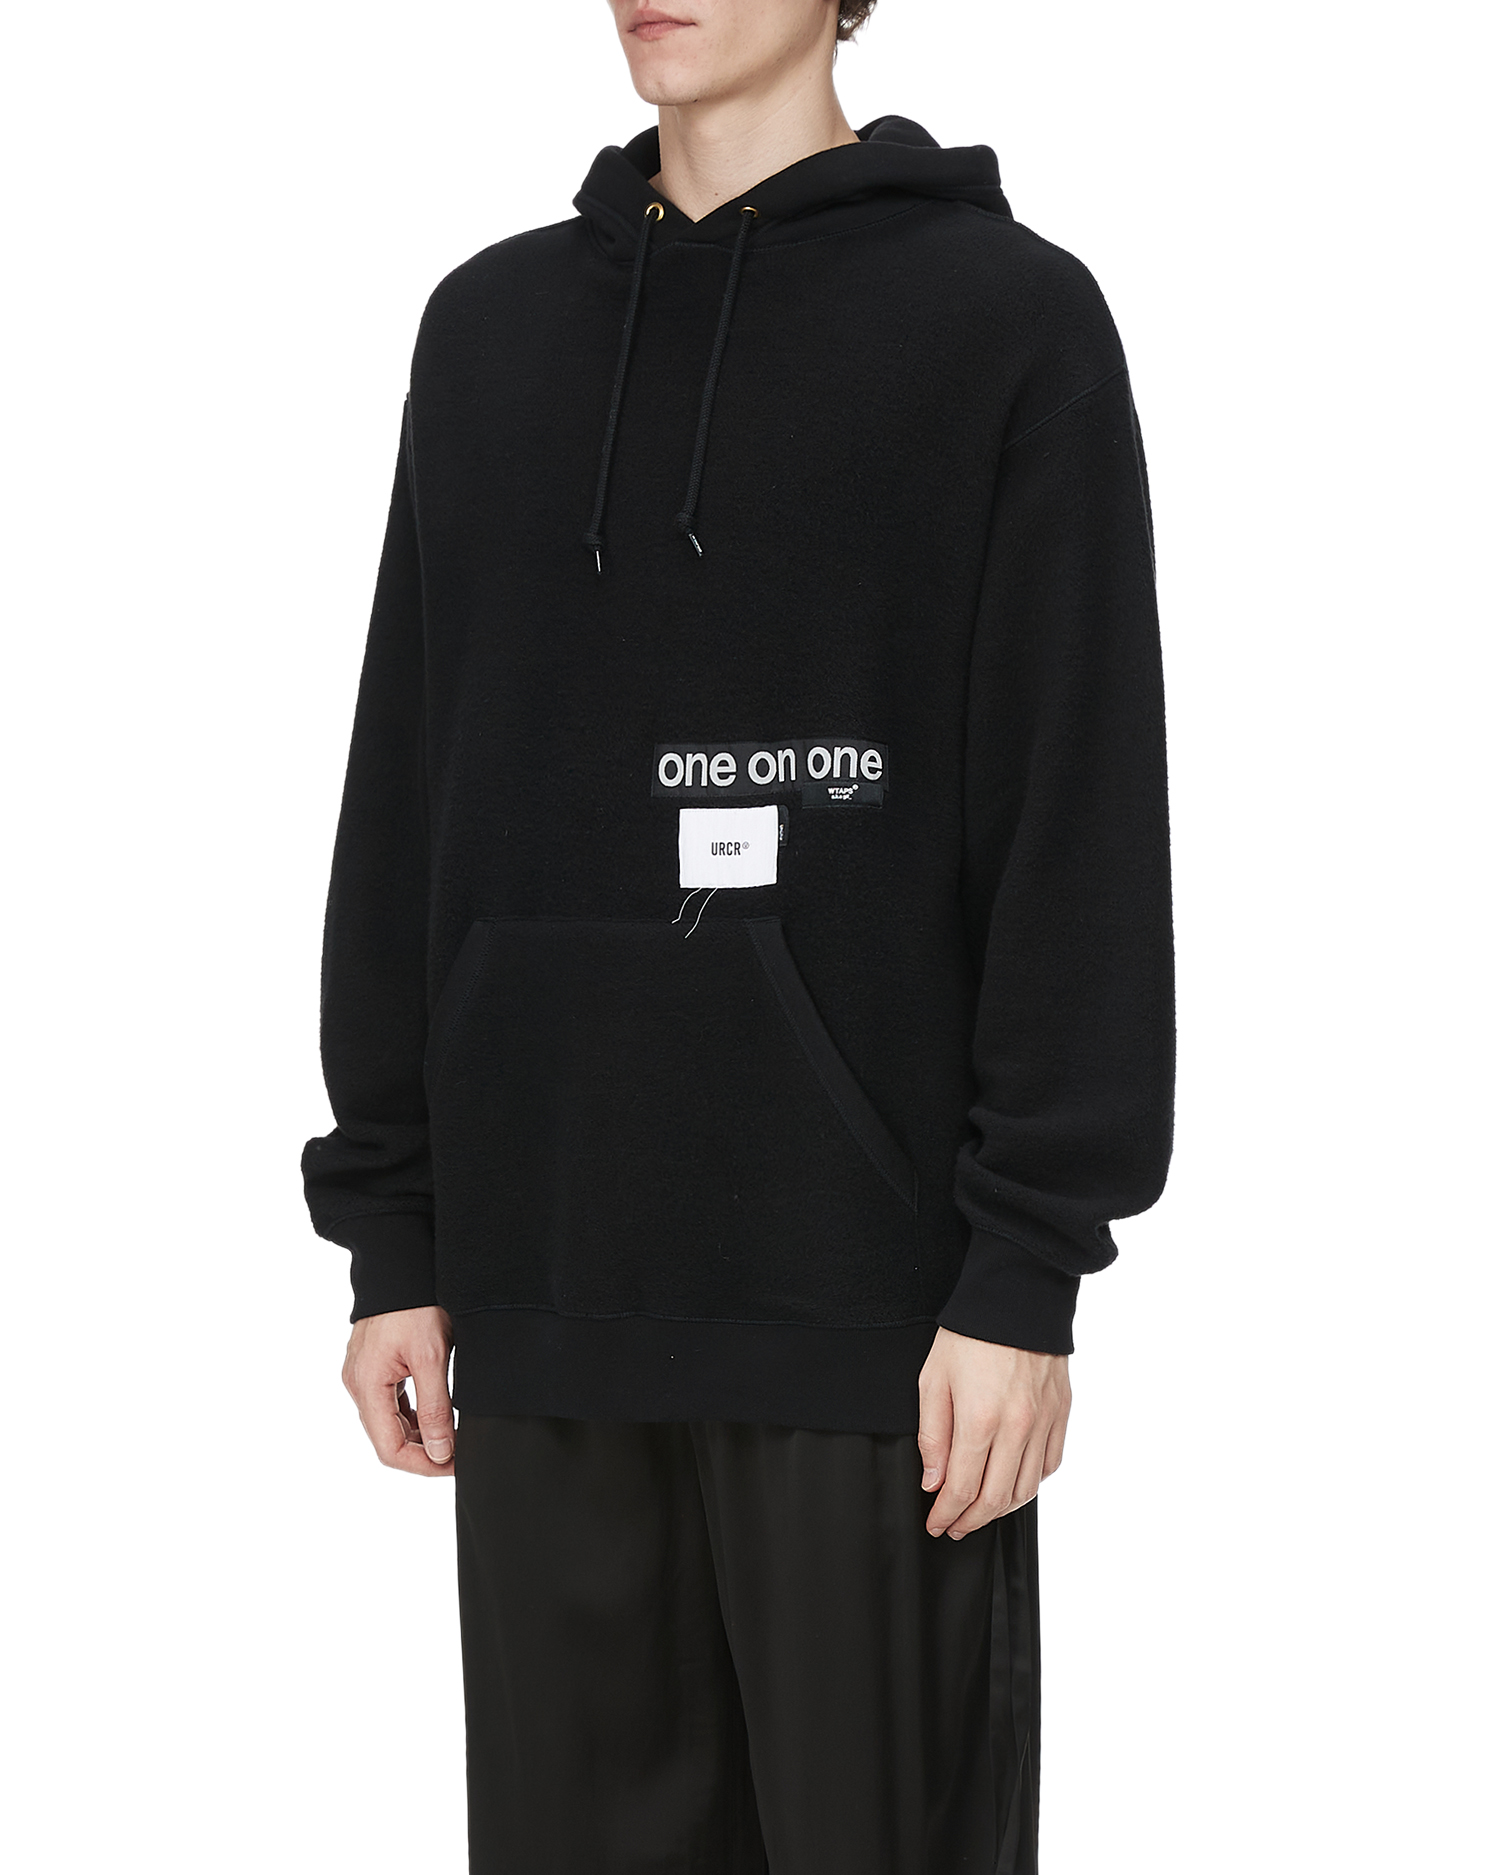 X UNDERCOVER GIG / Hooded / Cotton